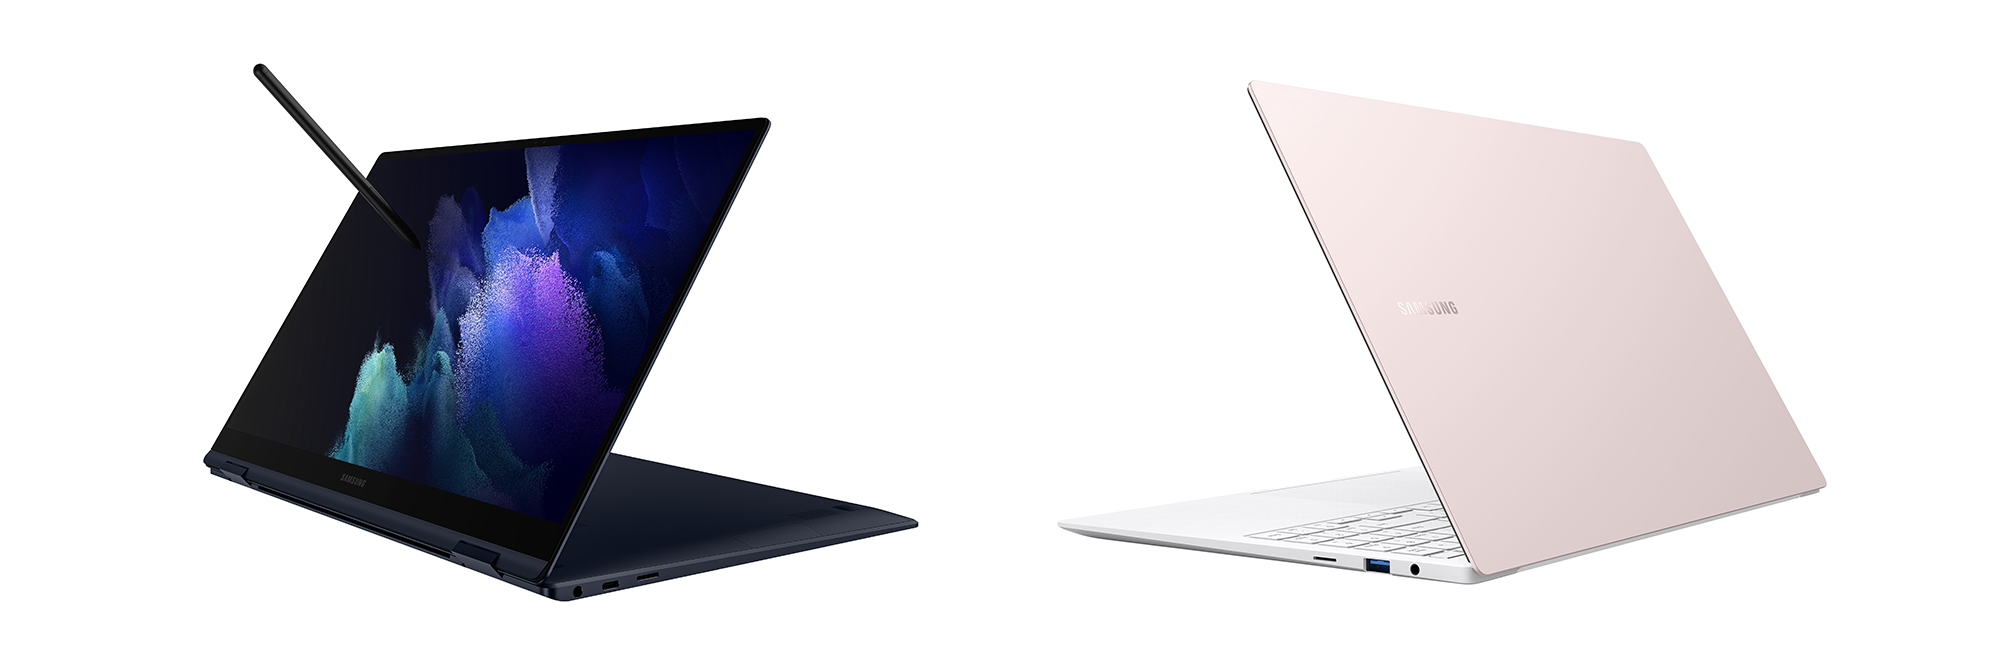 Galaxy Book Pro 360 in mystic navy and Galaxy Book Pro in Mystic Pink Gold